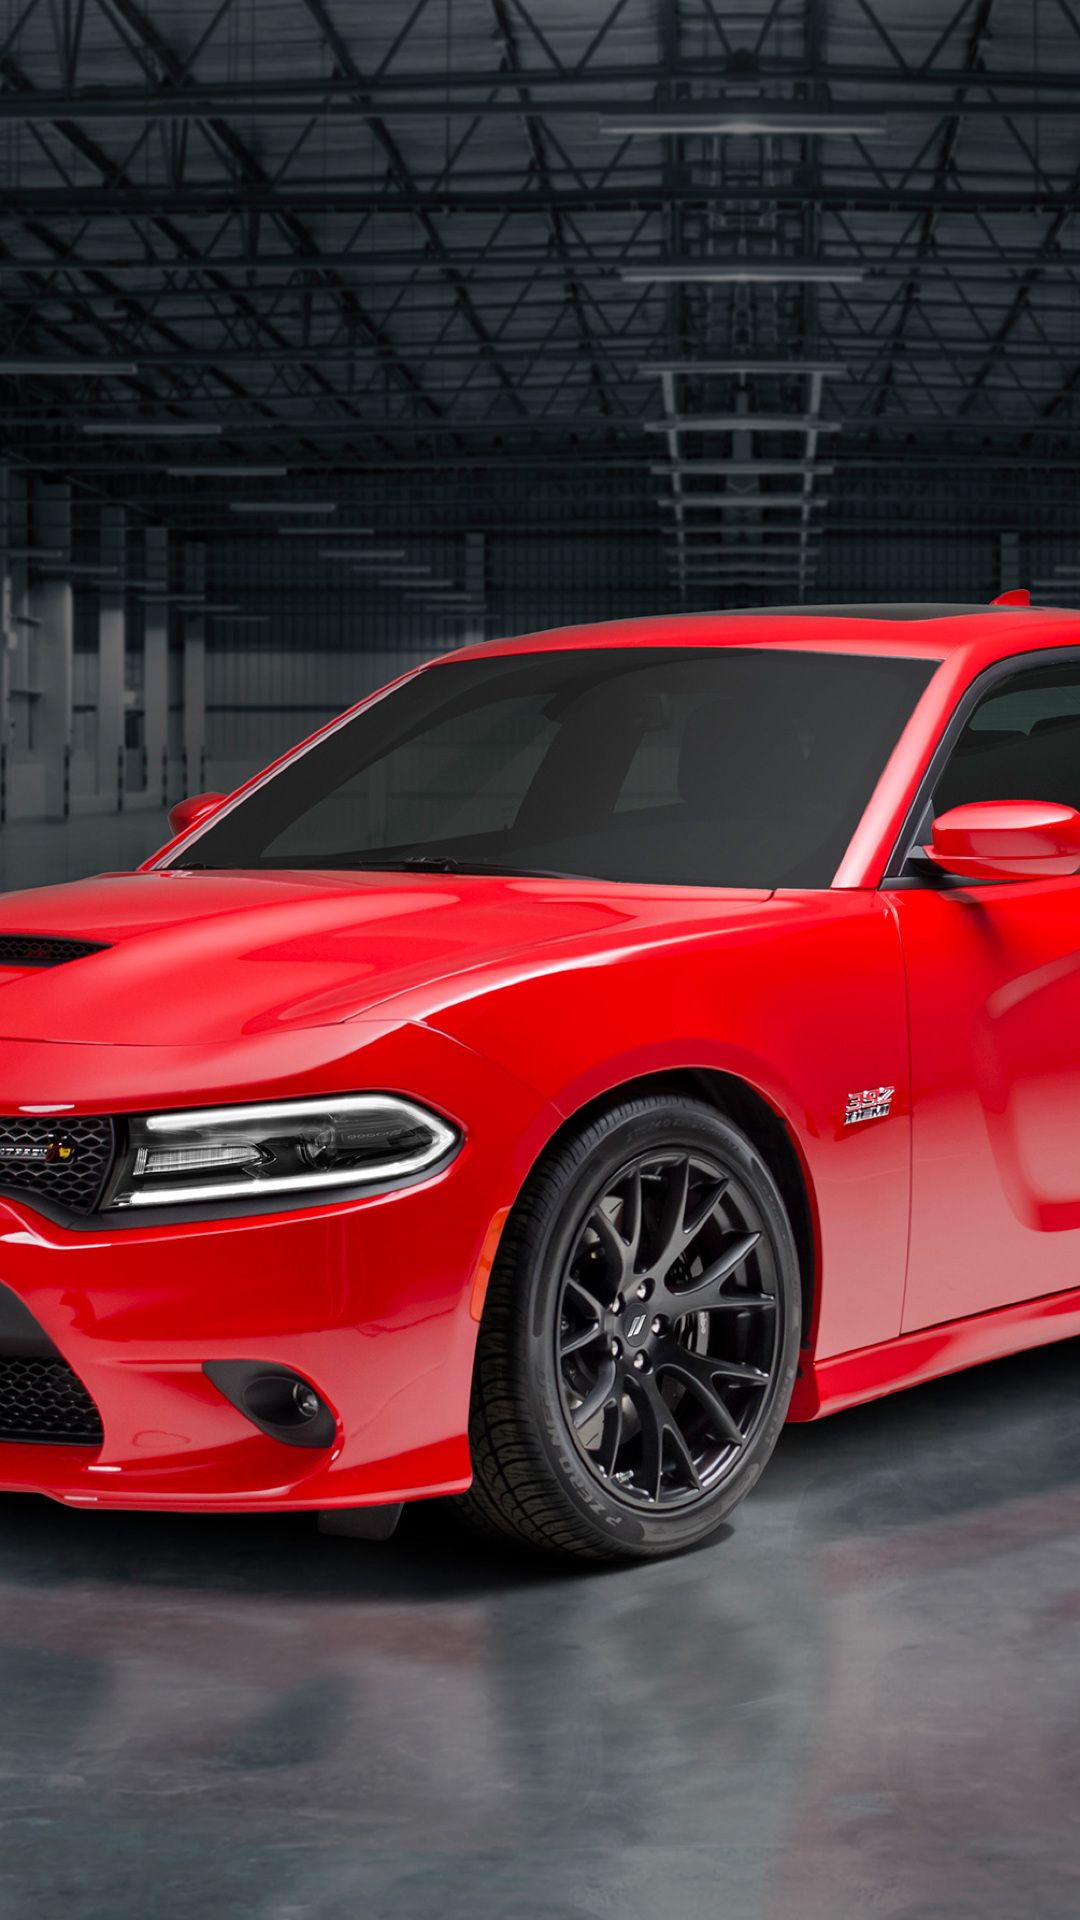 Dodge Charger Super Scat Pack iPhone 6s, 6 Plus and Pixel XL , One Plus 3t, 5 Wallpaper, HD Cars 4K Wallpaper, Image, Photo and Background